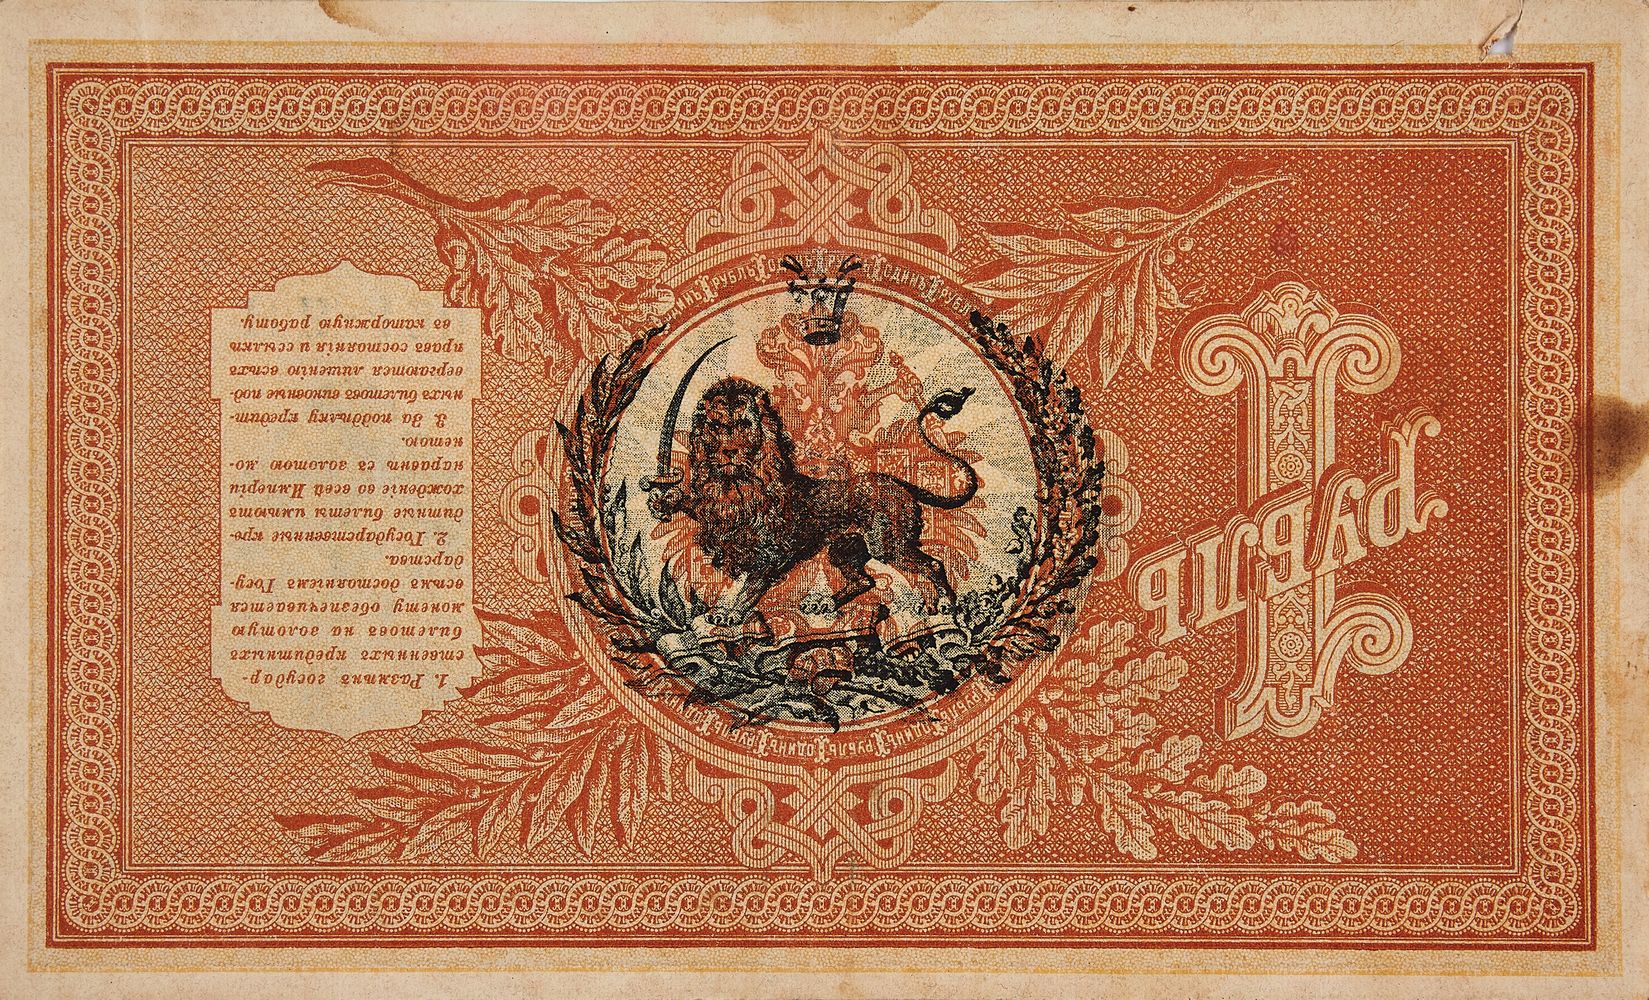 The first Russian banknote, 1 Ruble, stamped with the Qajar seal for use in Iran